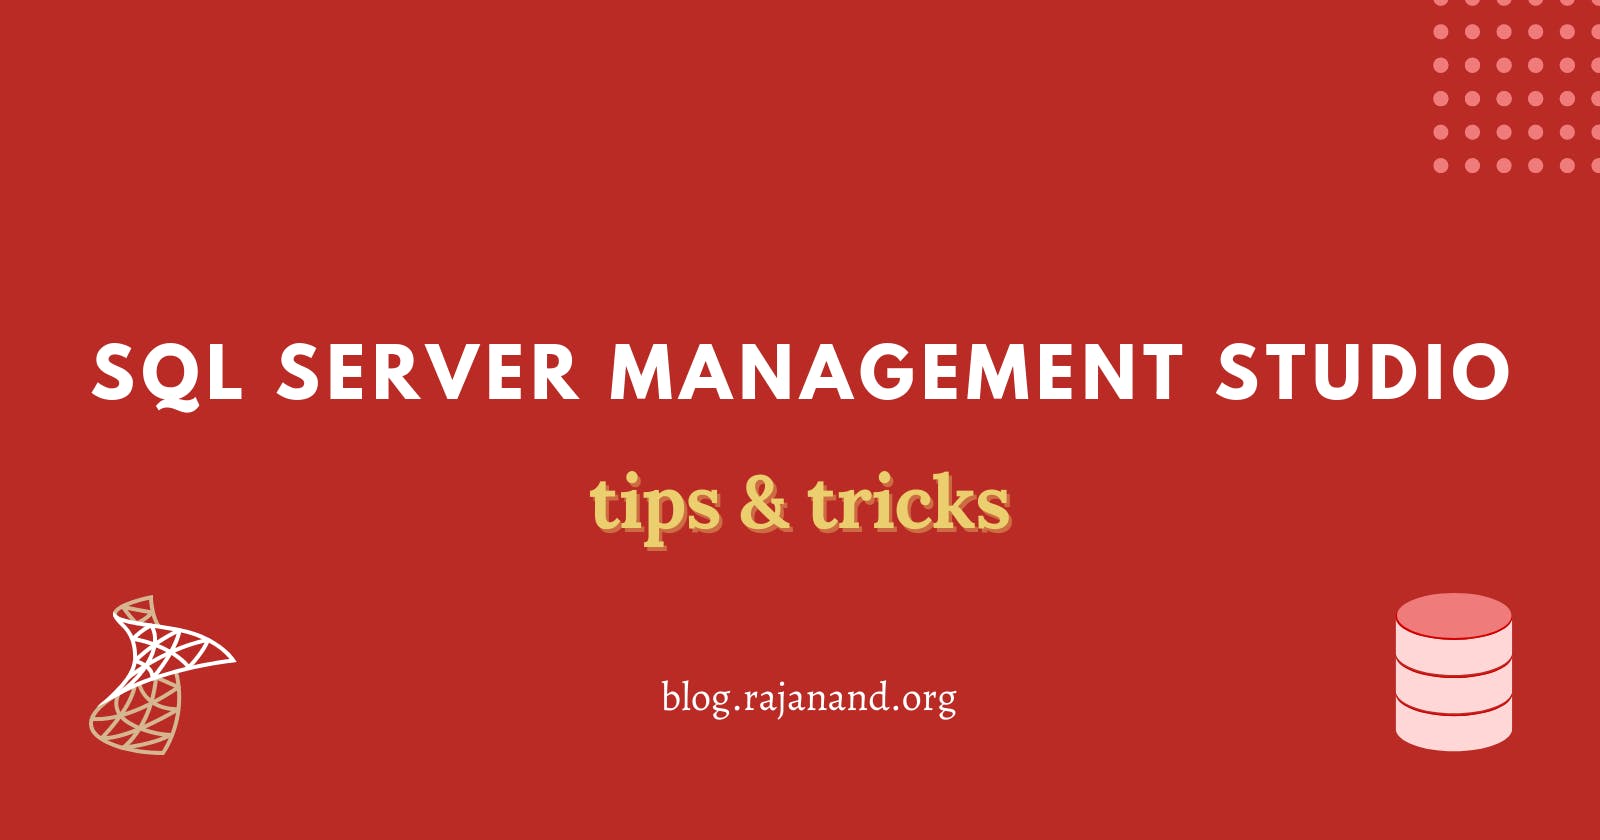 10 tips to increase your SQL Server Management Studio productivity